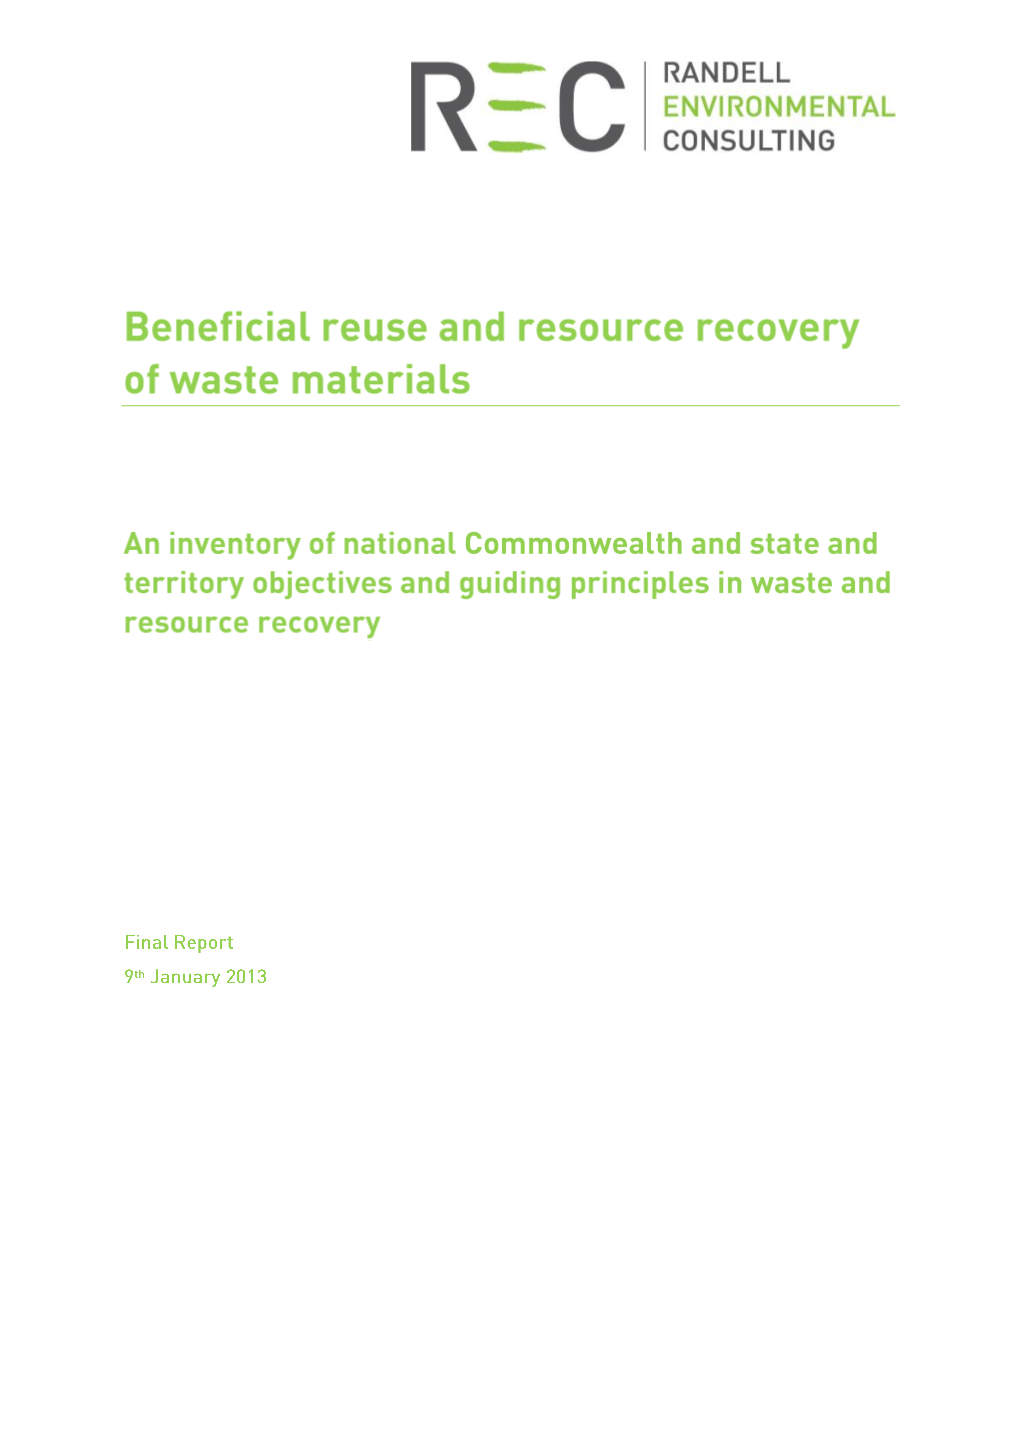 Beneficial Reuse and Resource Recovery of Waste Materials